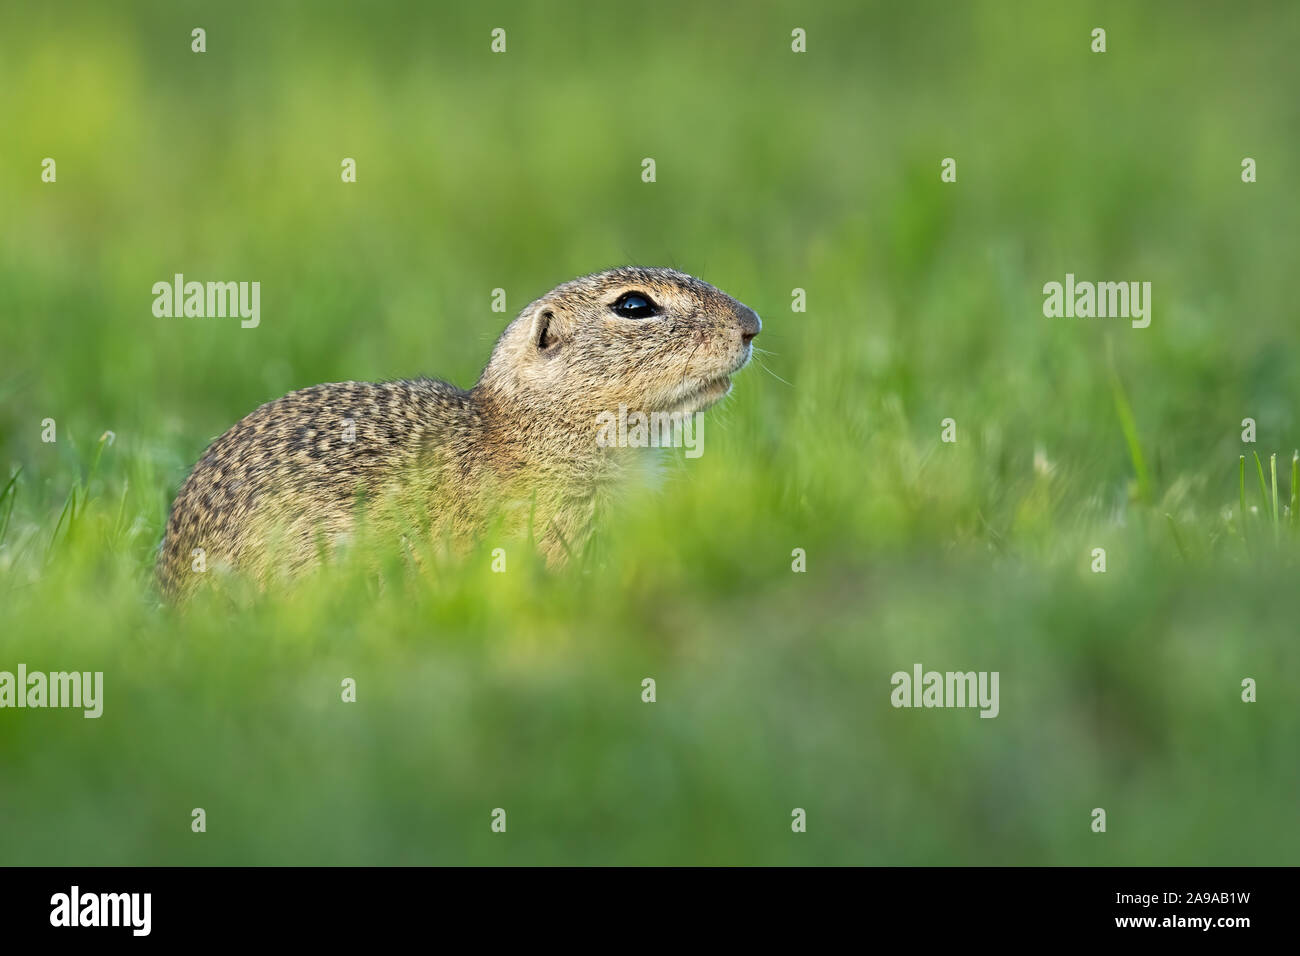 Endangered european ground squirrel hiding with copy space Stock Photo